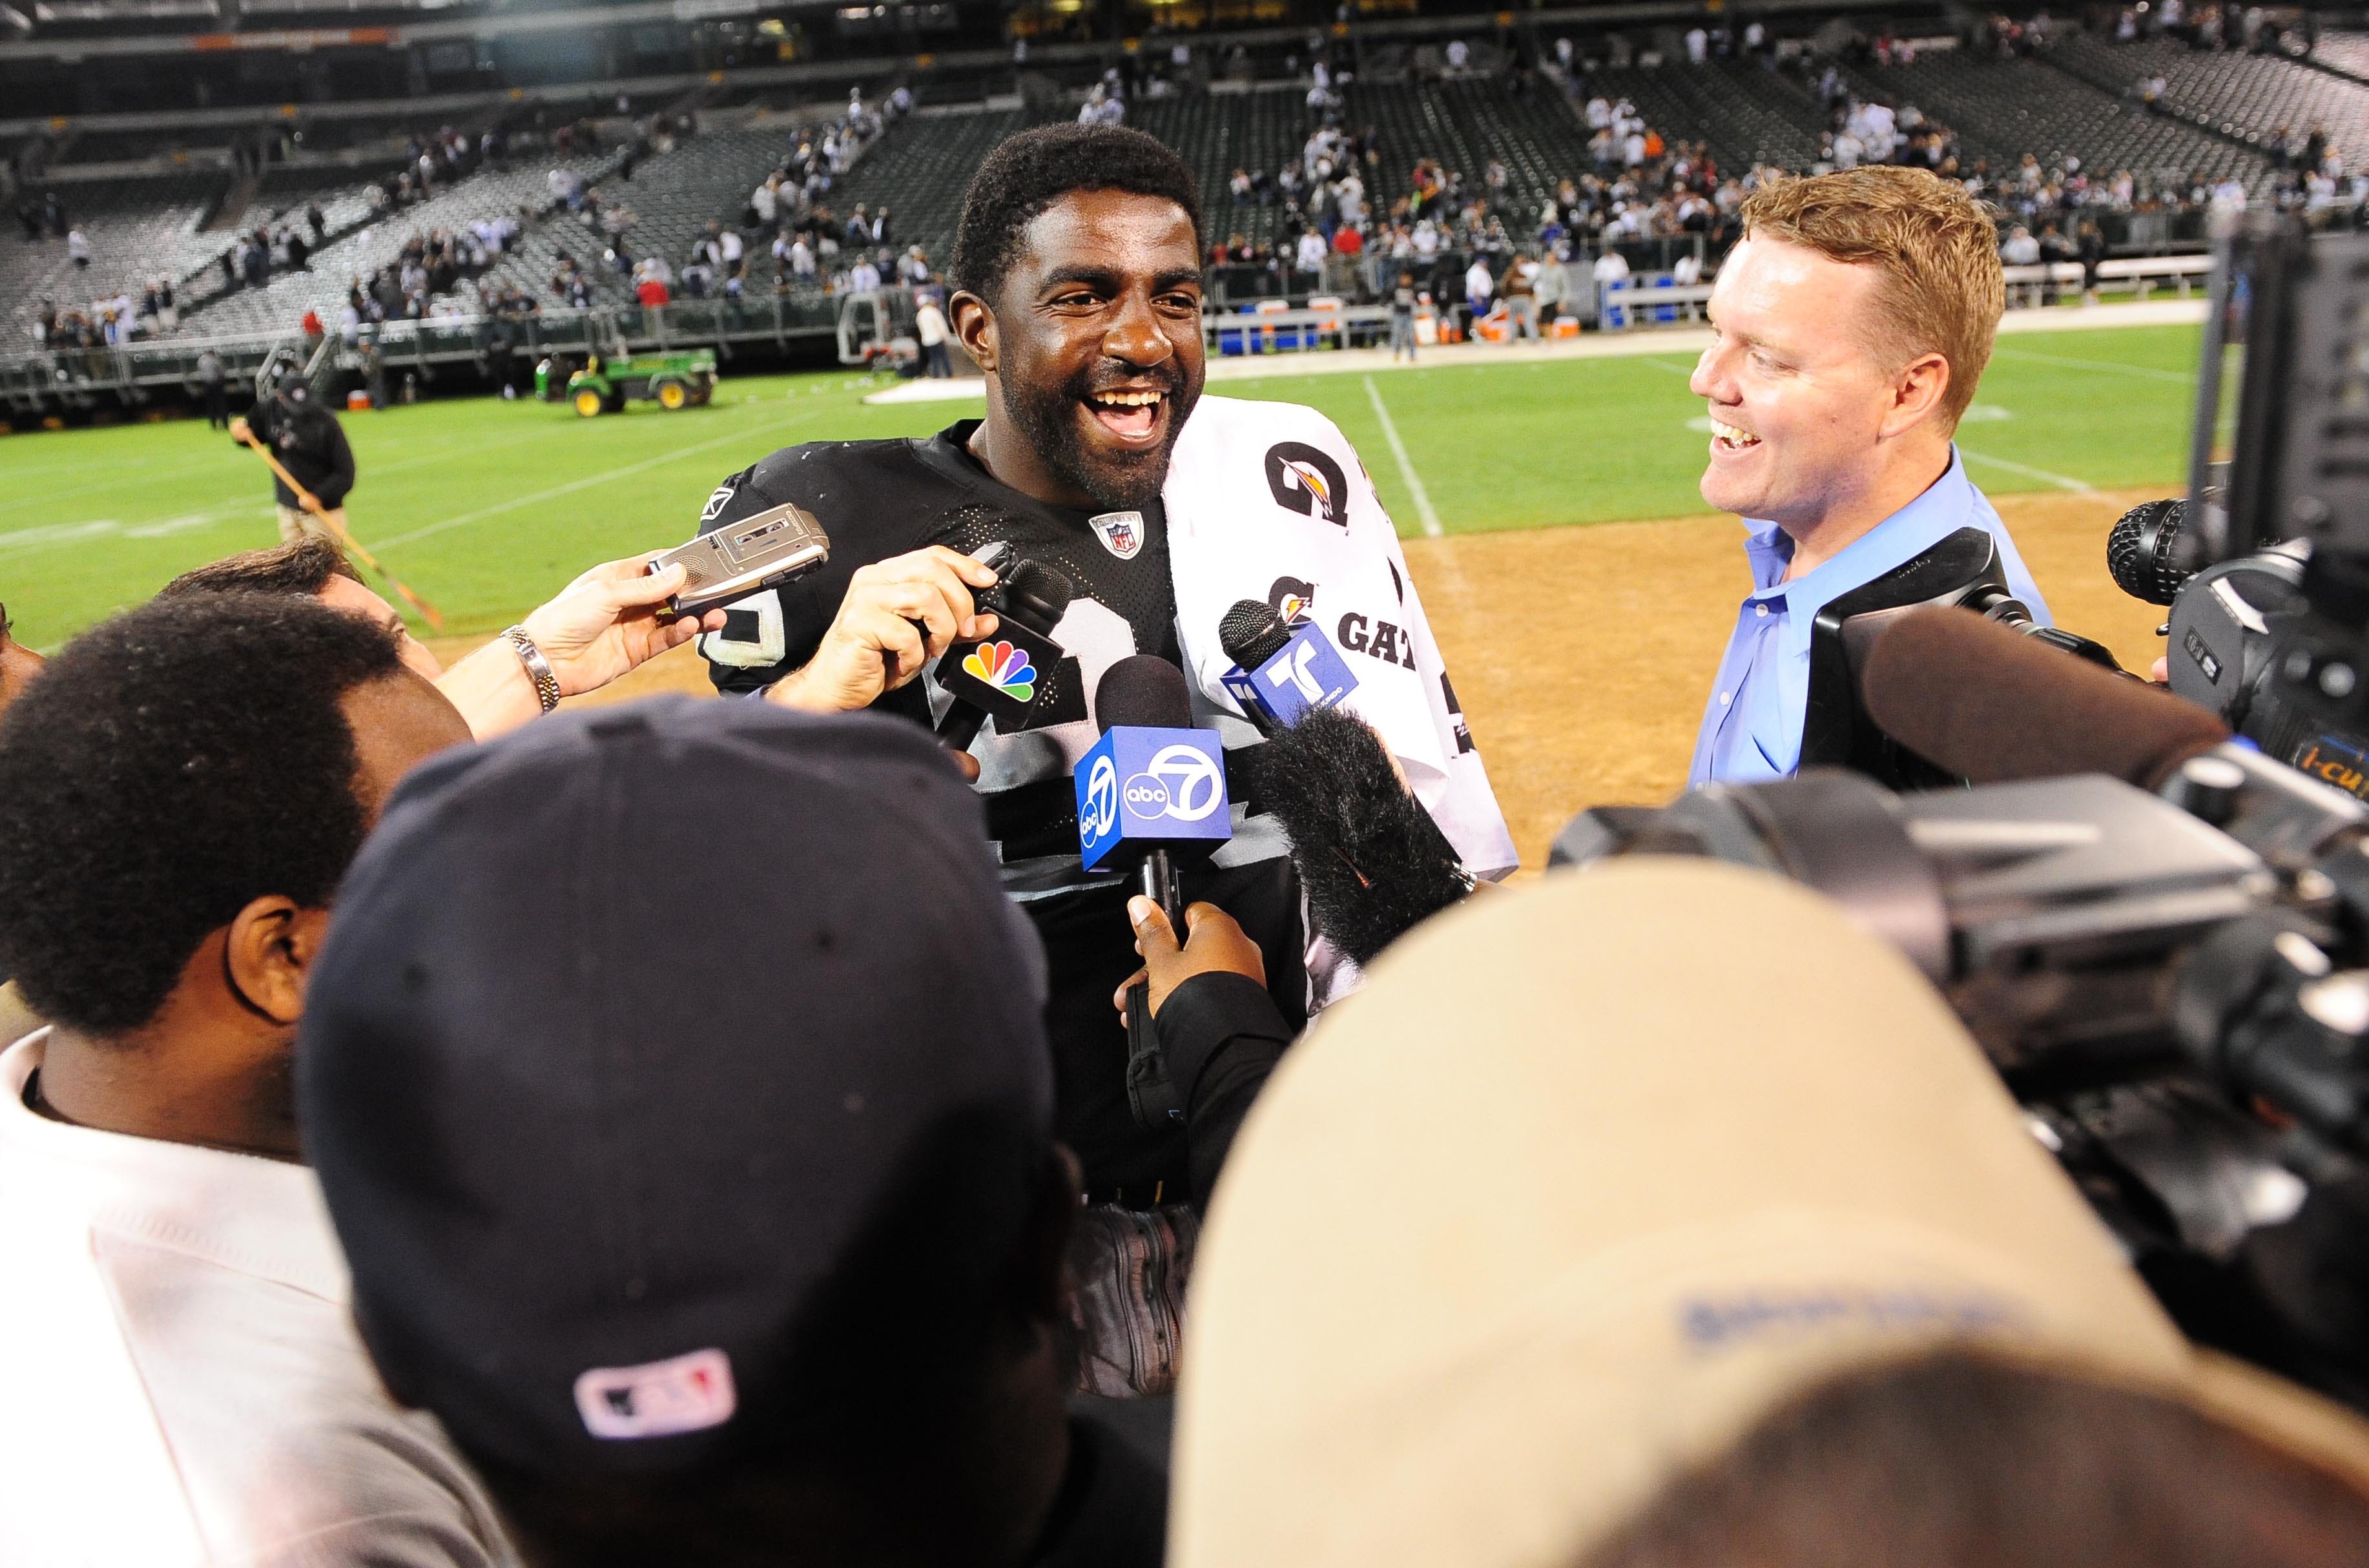 In this 2009 file photo, Oakland Raiders defensive end Greg Ellis talks to the media after a game against the Dallas Cowboys at Oakland-Alameda County Coliseum. The Raiders defeated the Cowboys 31-10.